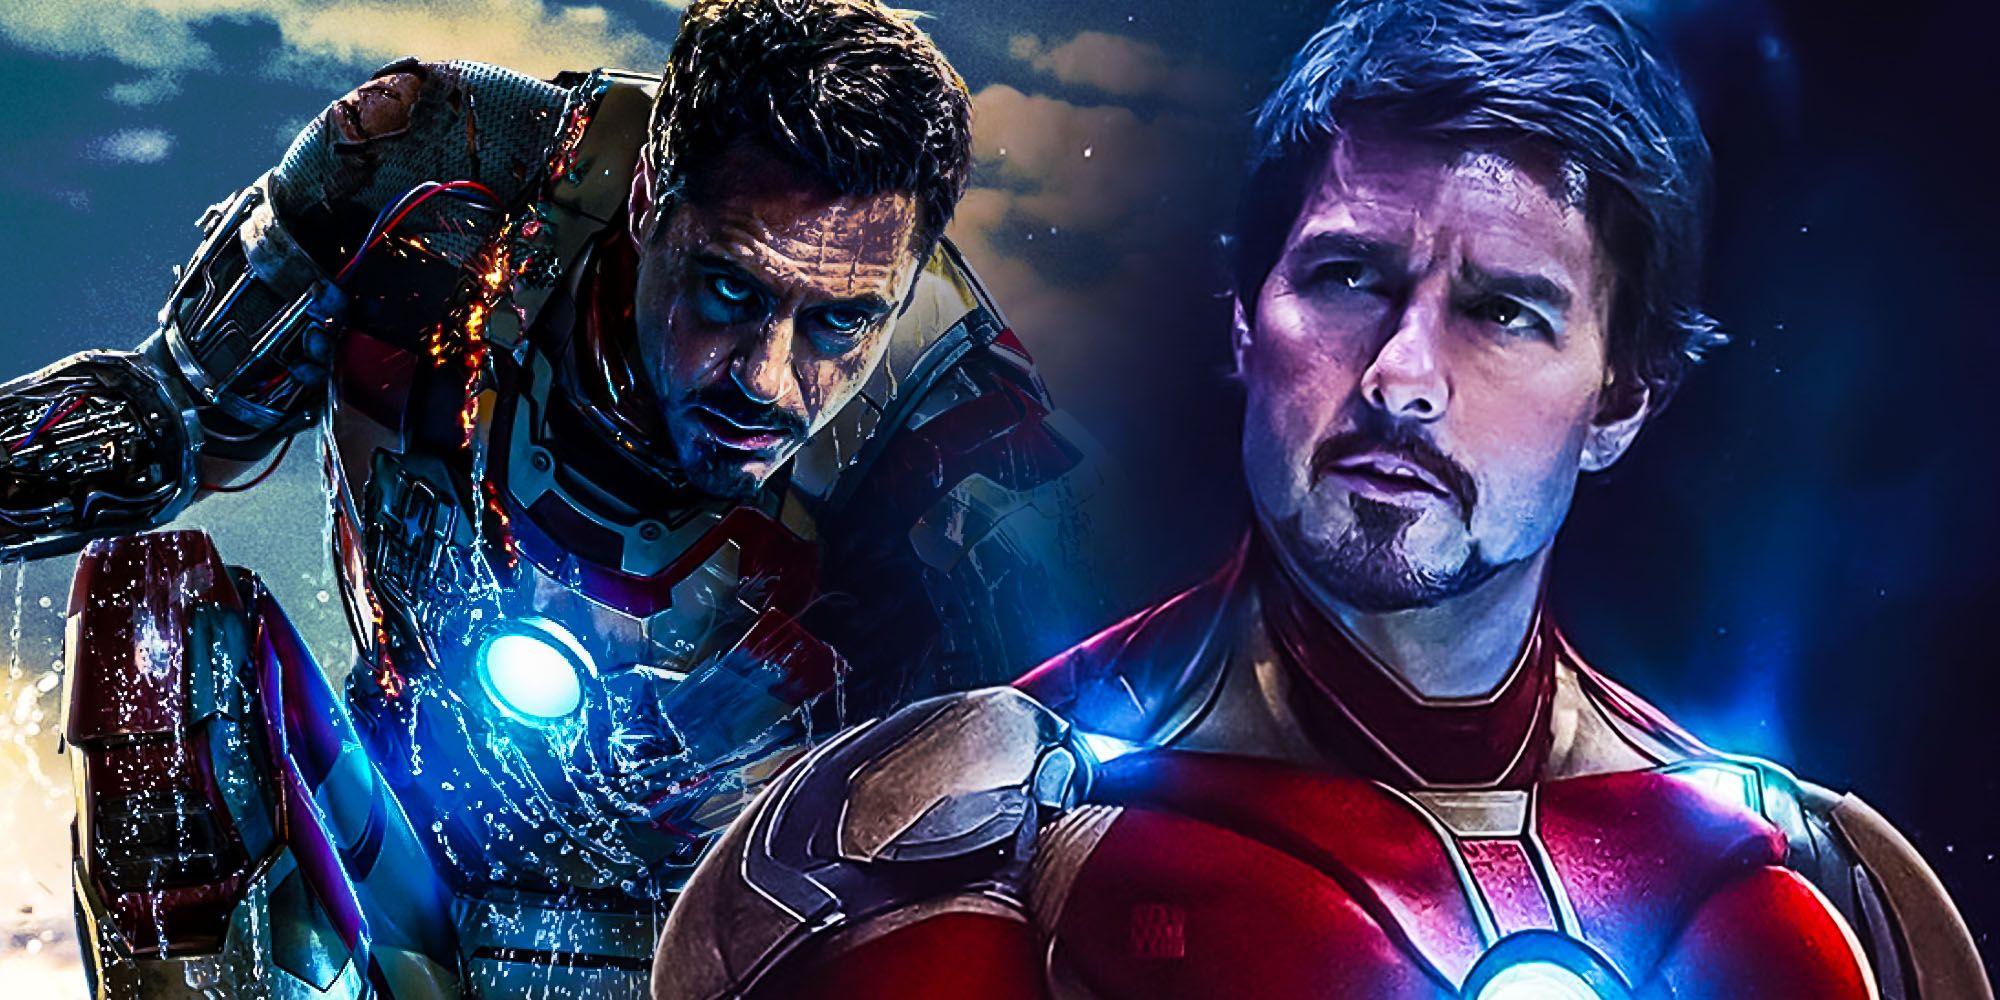 Doctor strange 2 why fans think Tom Cruise is replacing Robert Downey Jr as Iron man